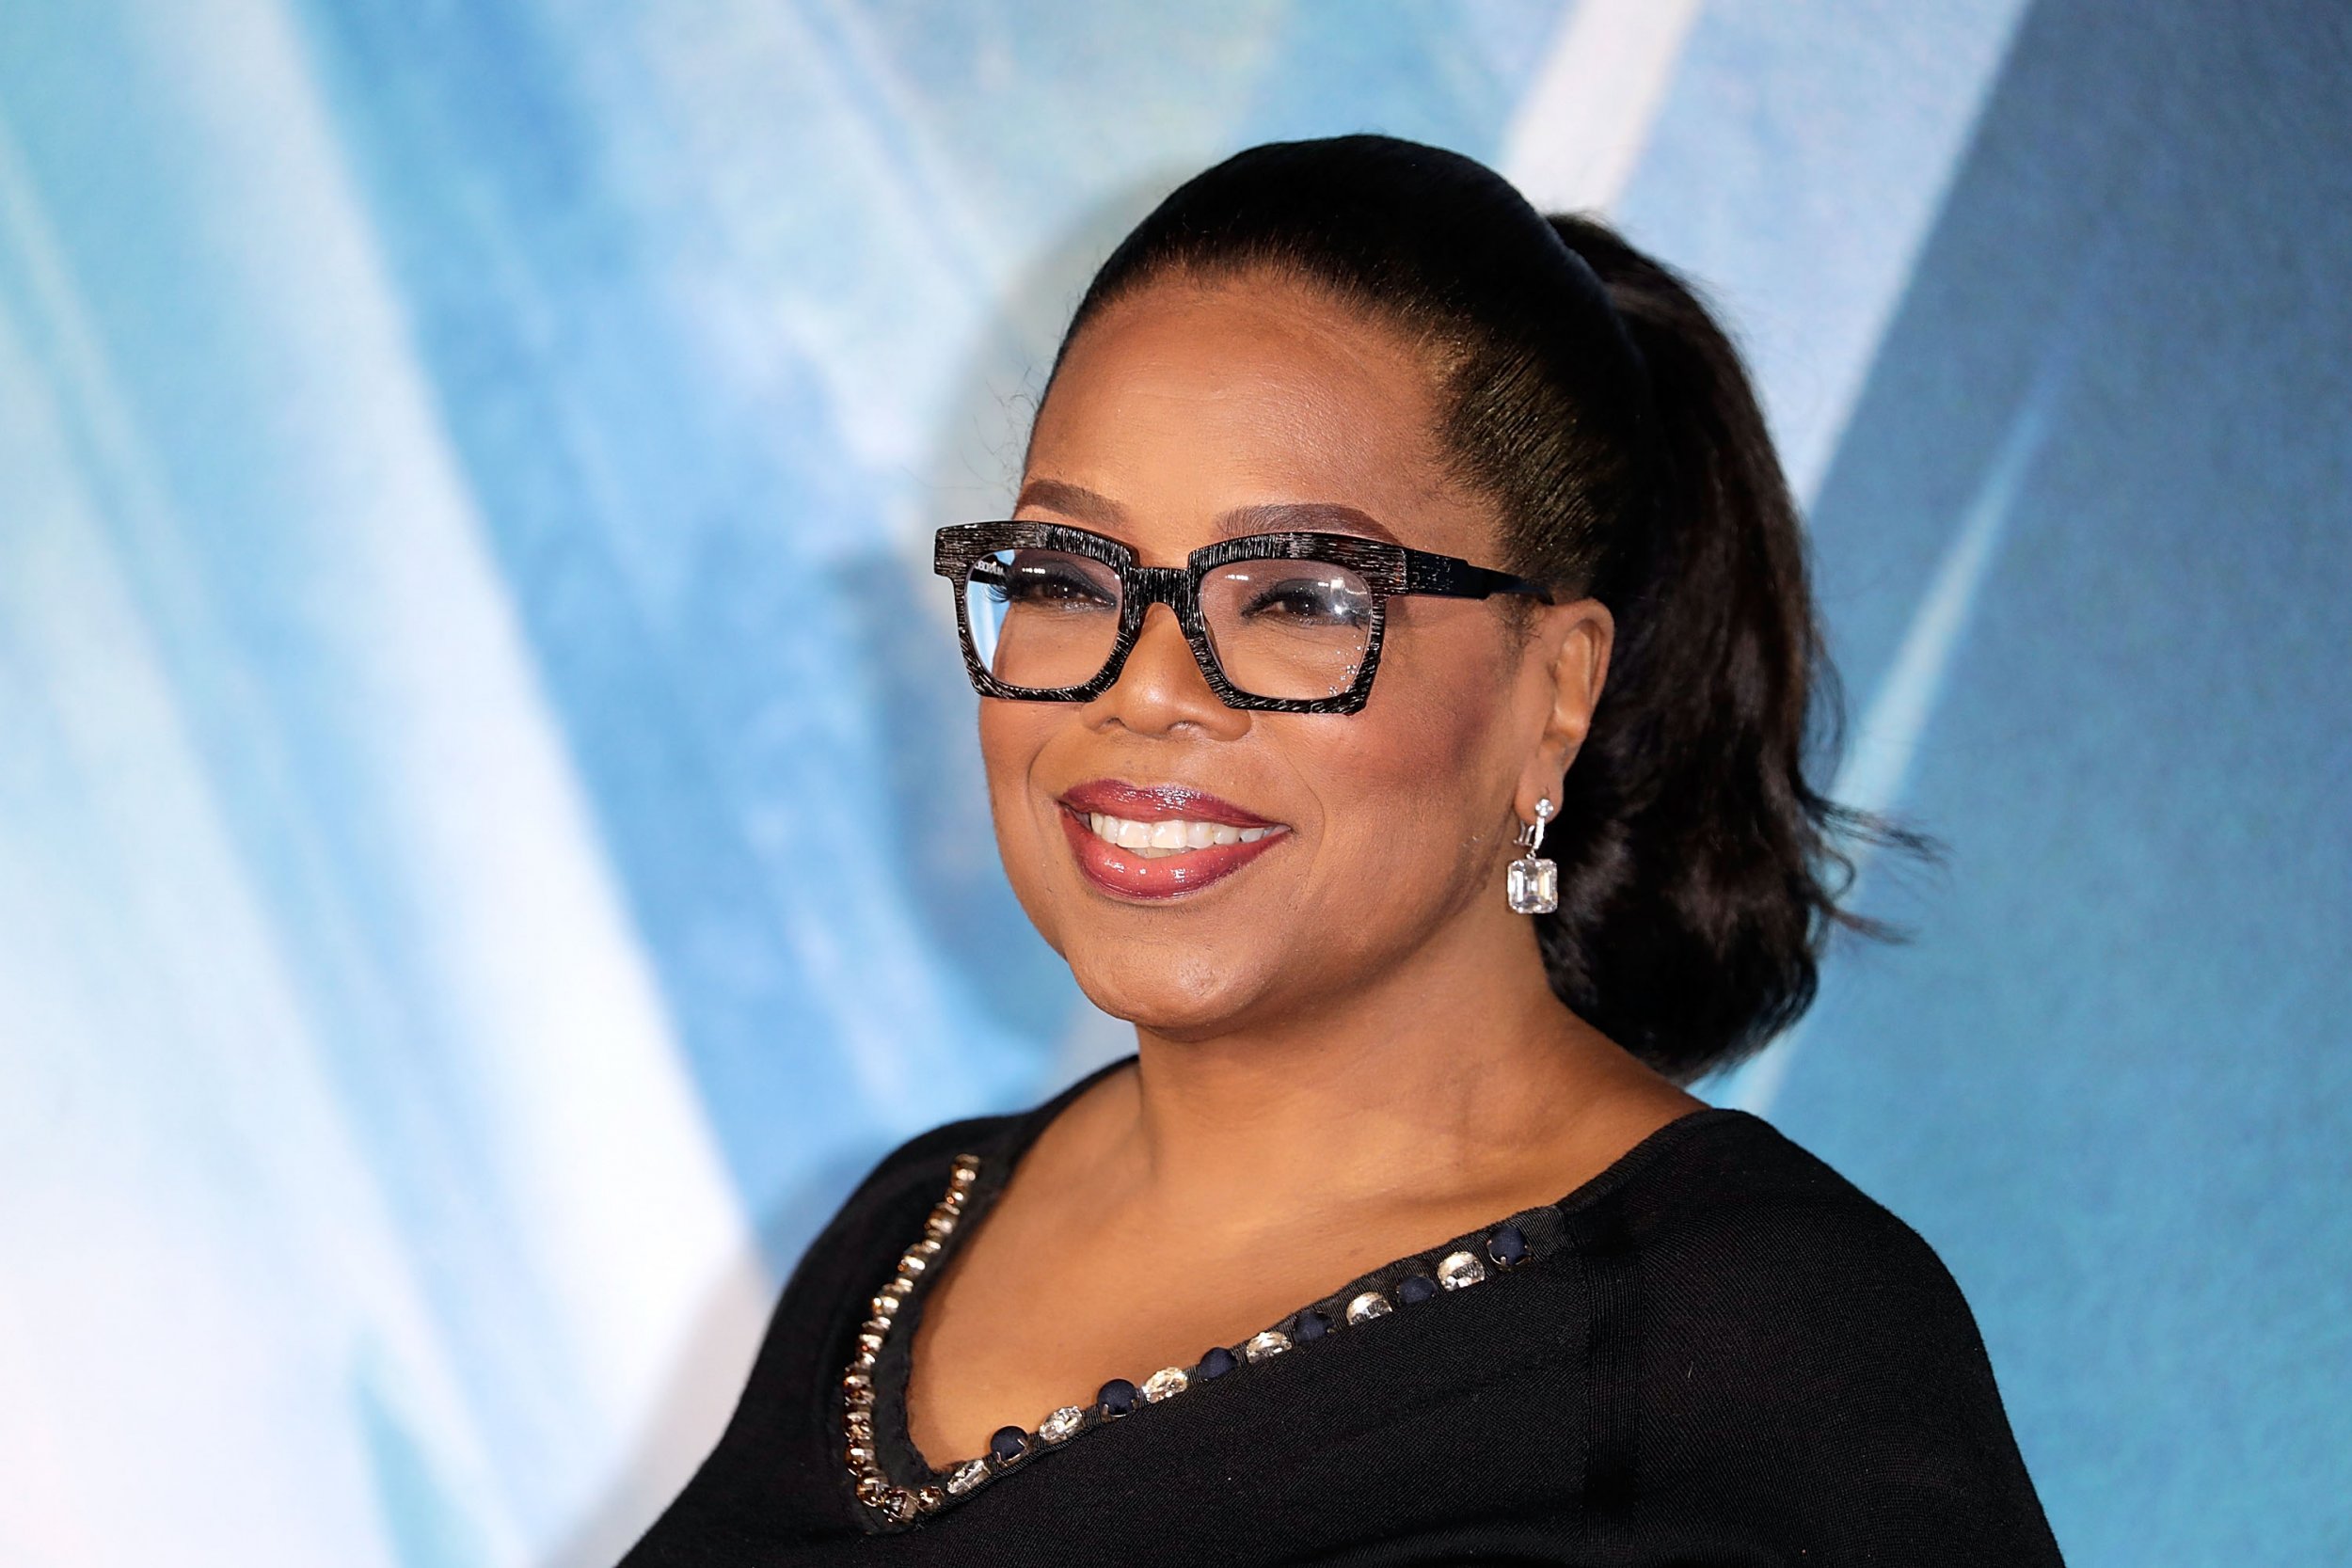 Oprah on Giving to Homeless